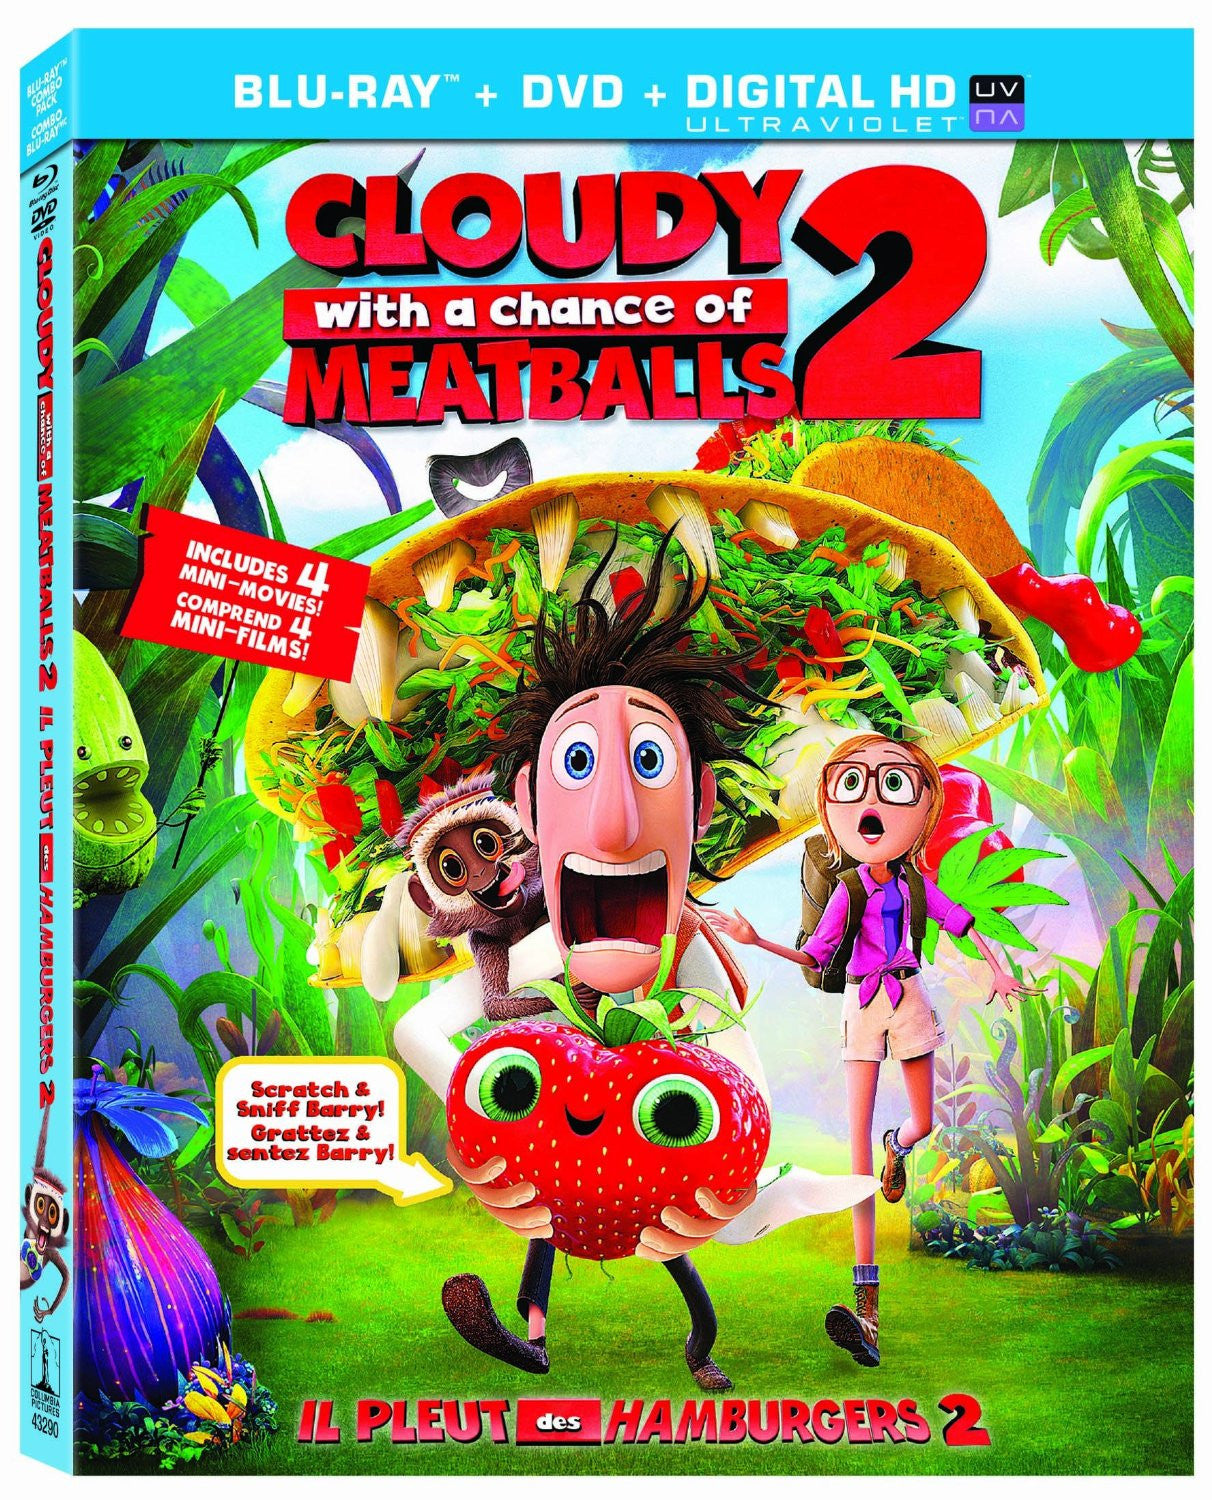 Cloudy with a Chance of Meatballs 2 [Blu-ray + DVD + UltraViolet